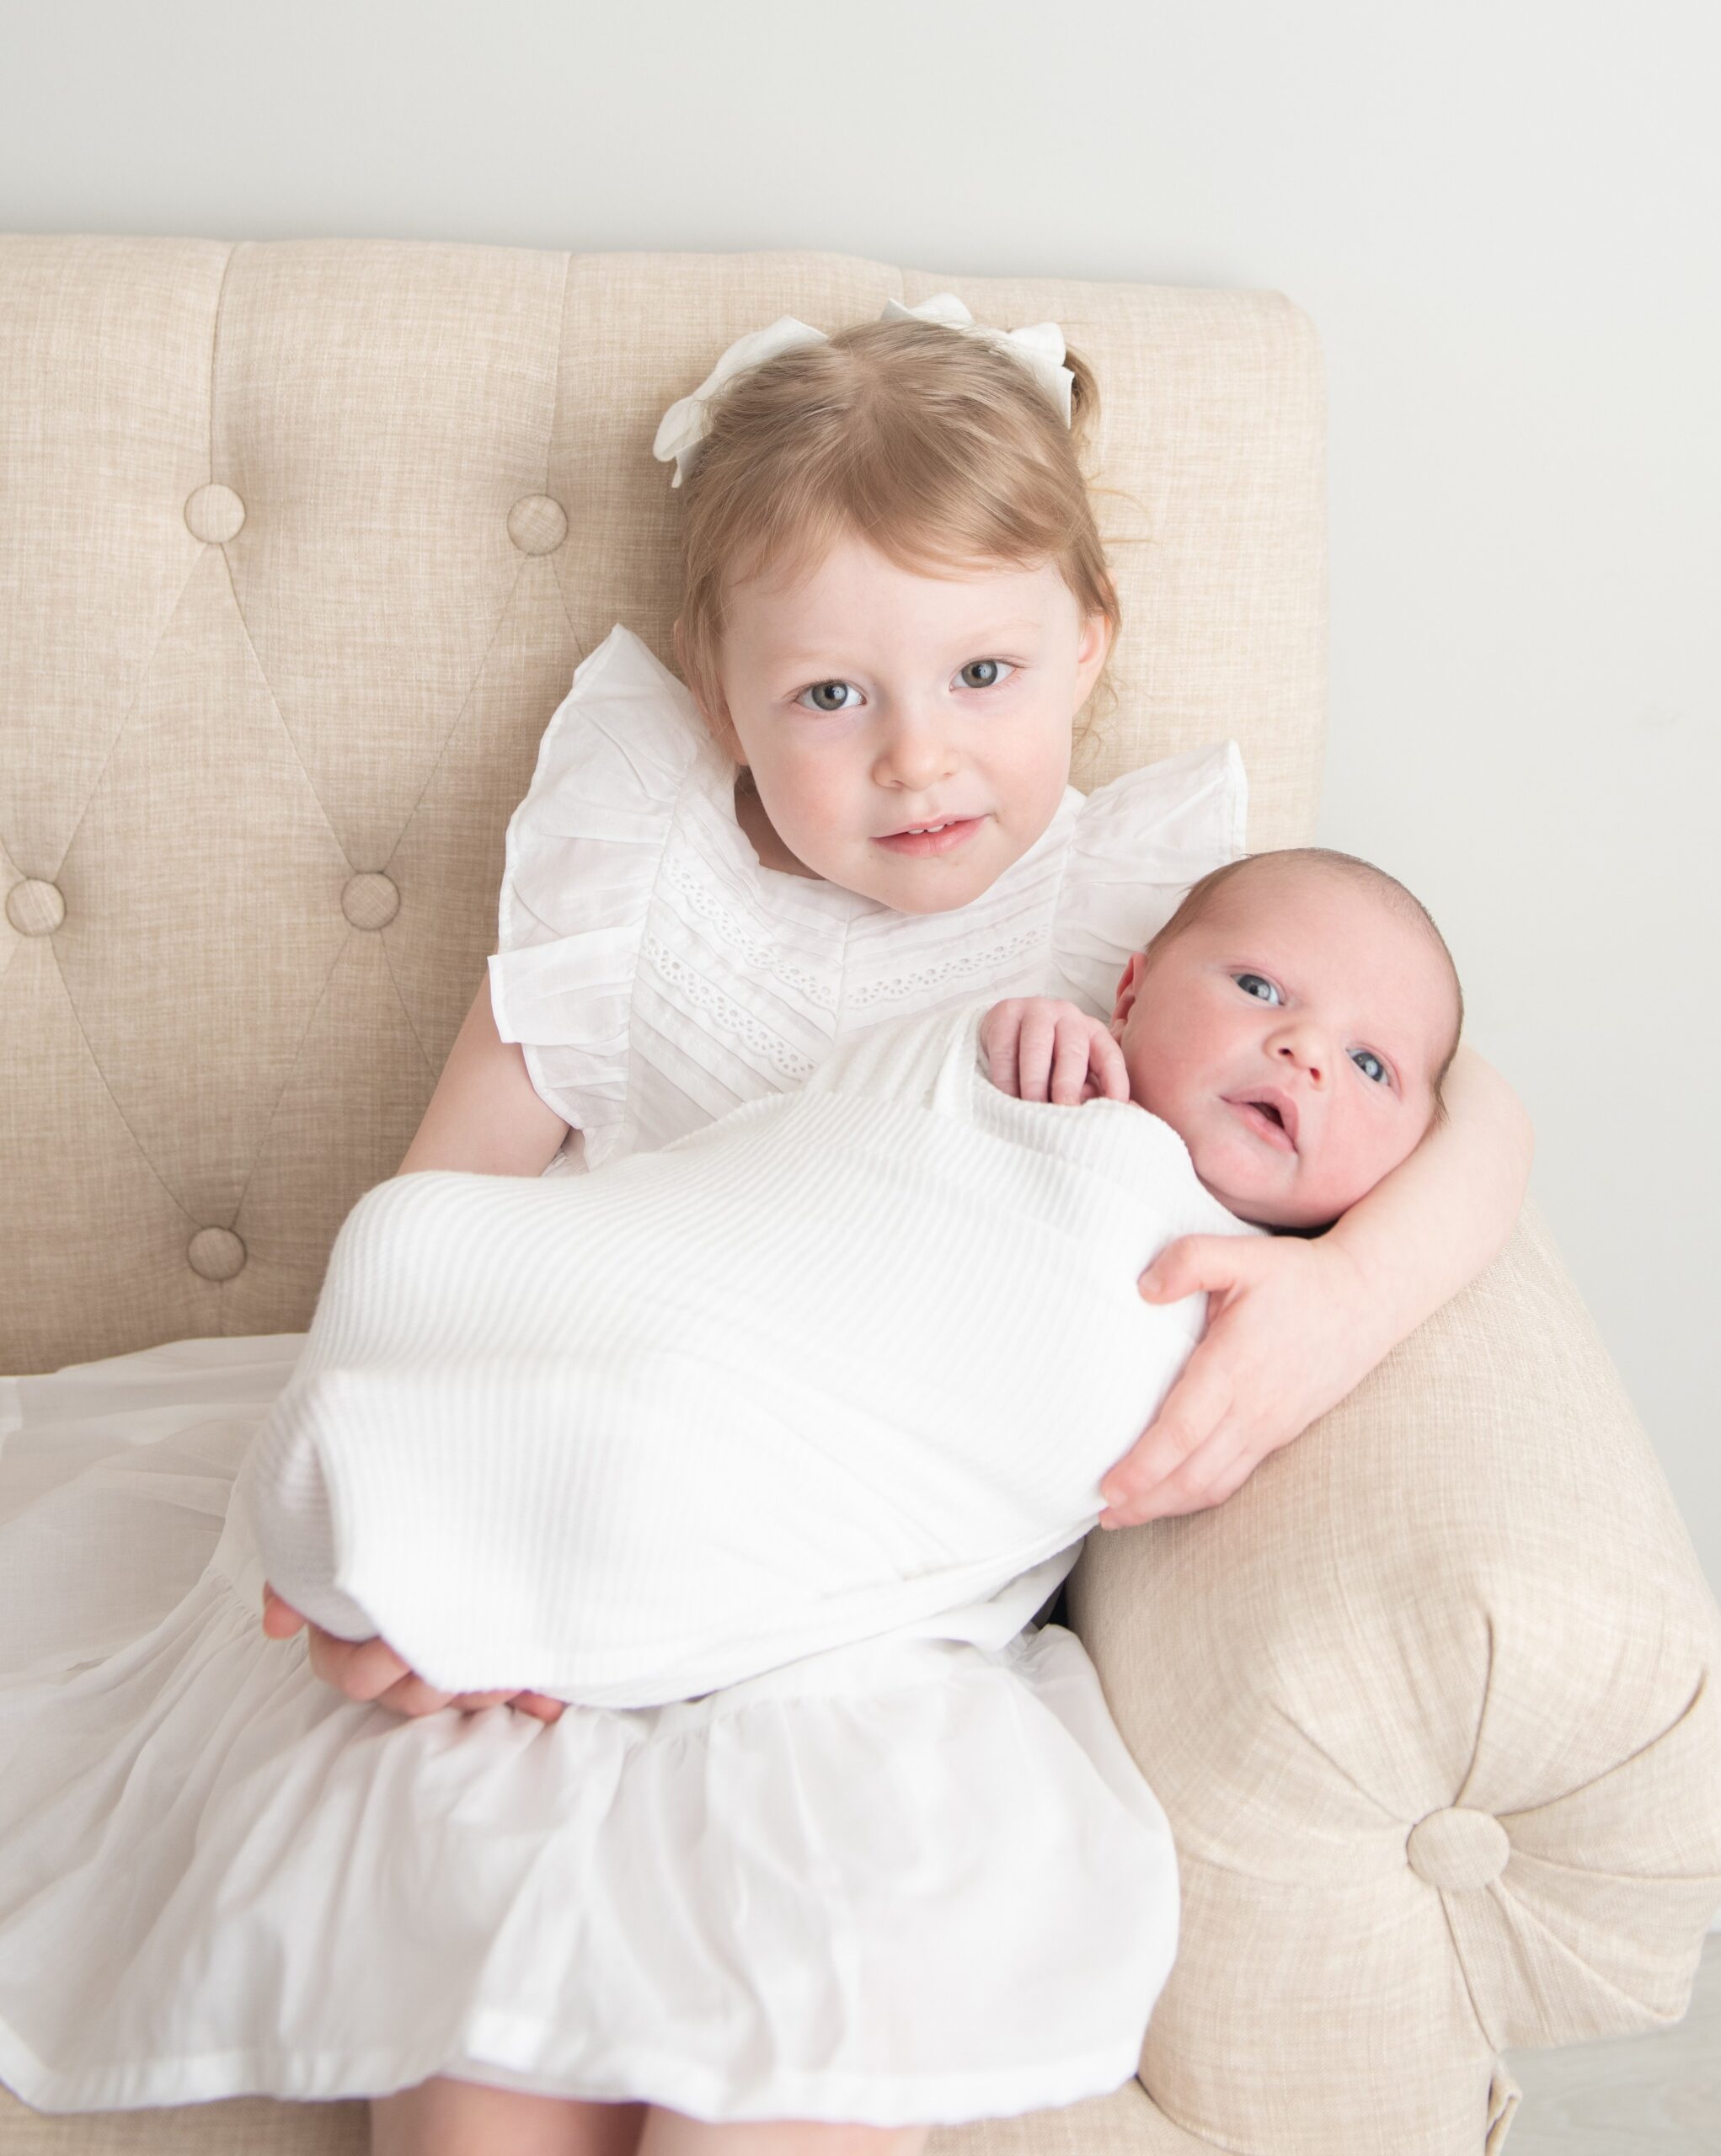 A young girl in a white dress sits on a couch with her newborn baby sibling in her lap